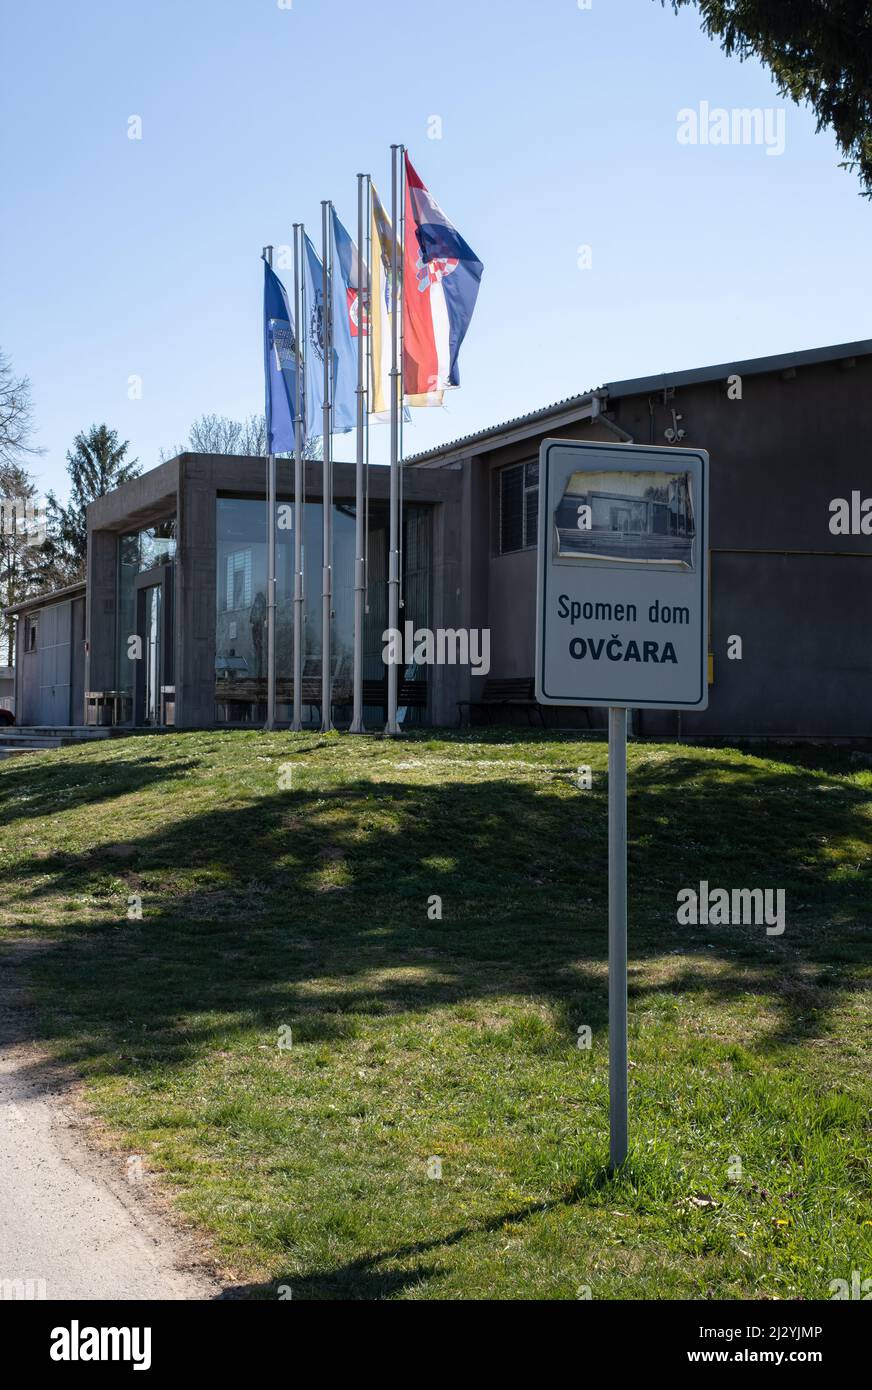 Grabovo Dio, Croatia - March 28, 2022: This hangar was transformed into a concentration camp for non-Serbs from Vukovar and the surrounding area. More Stock Photo